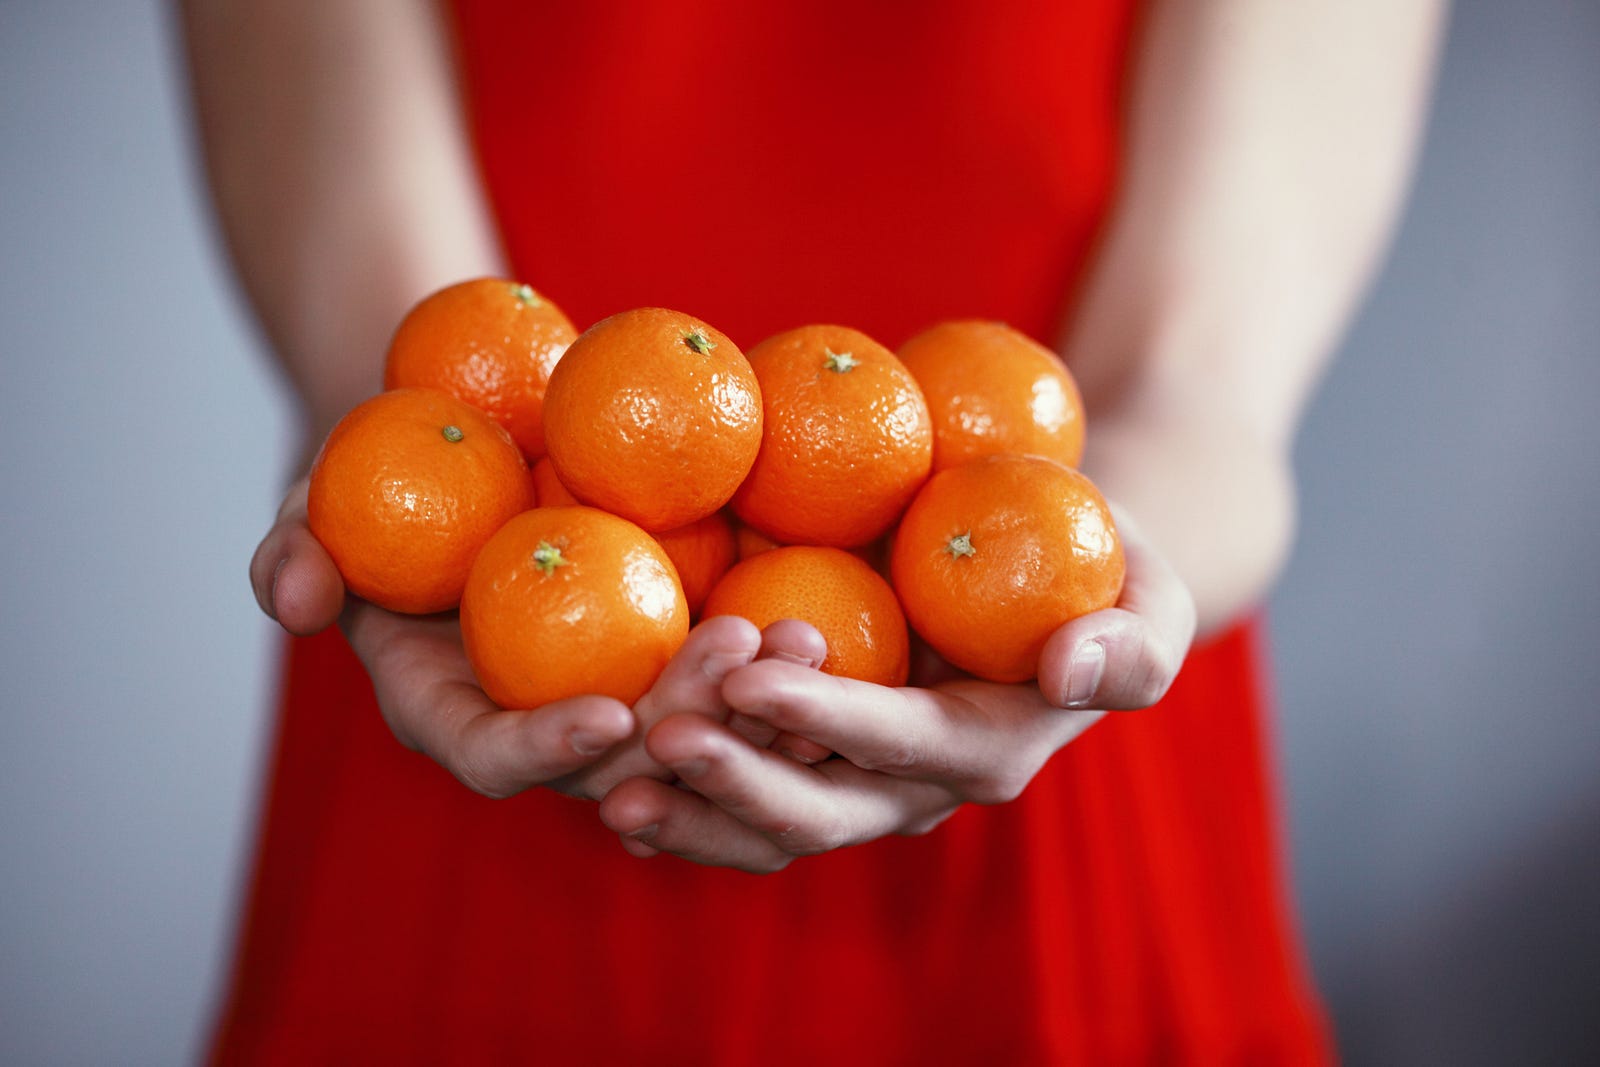 A woman holds 10 tangerines in her hands. We only see her torso, clad in a red dress. While I cannot tell you that tangerines reduce chronic brain disease, the fruit’s antioxidants may protect against dementia, Parkinson’s disease, and schizophrenia.